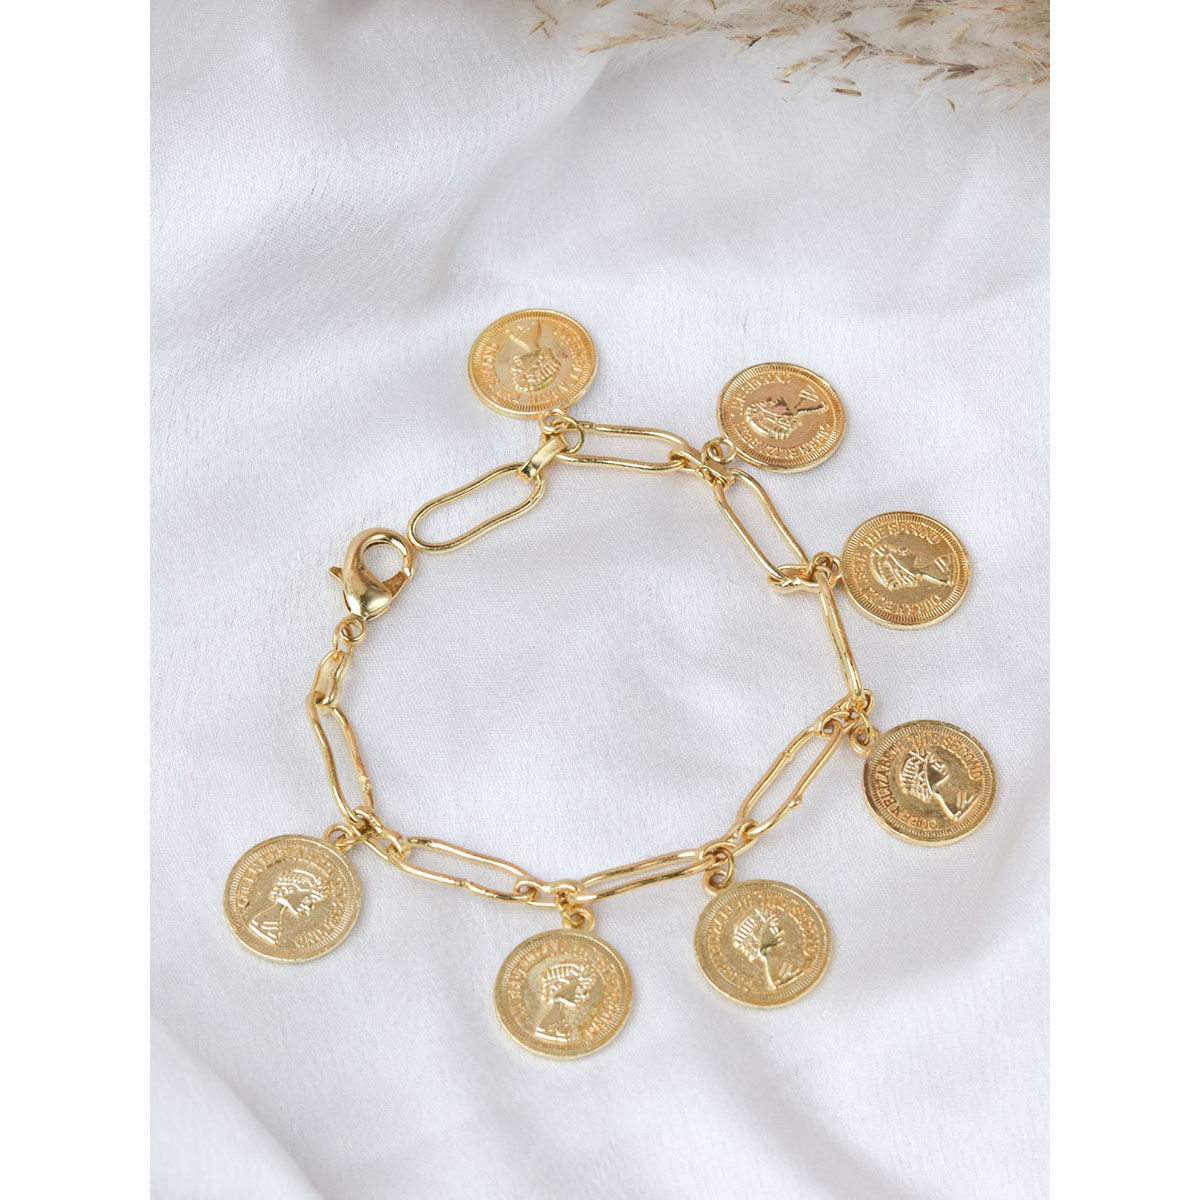 Sold at Auction: A gold coin bracelet